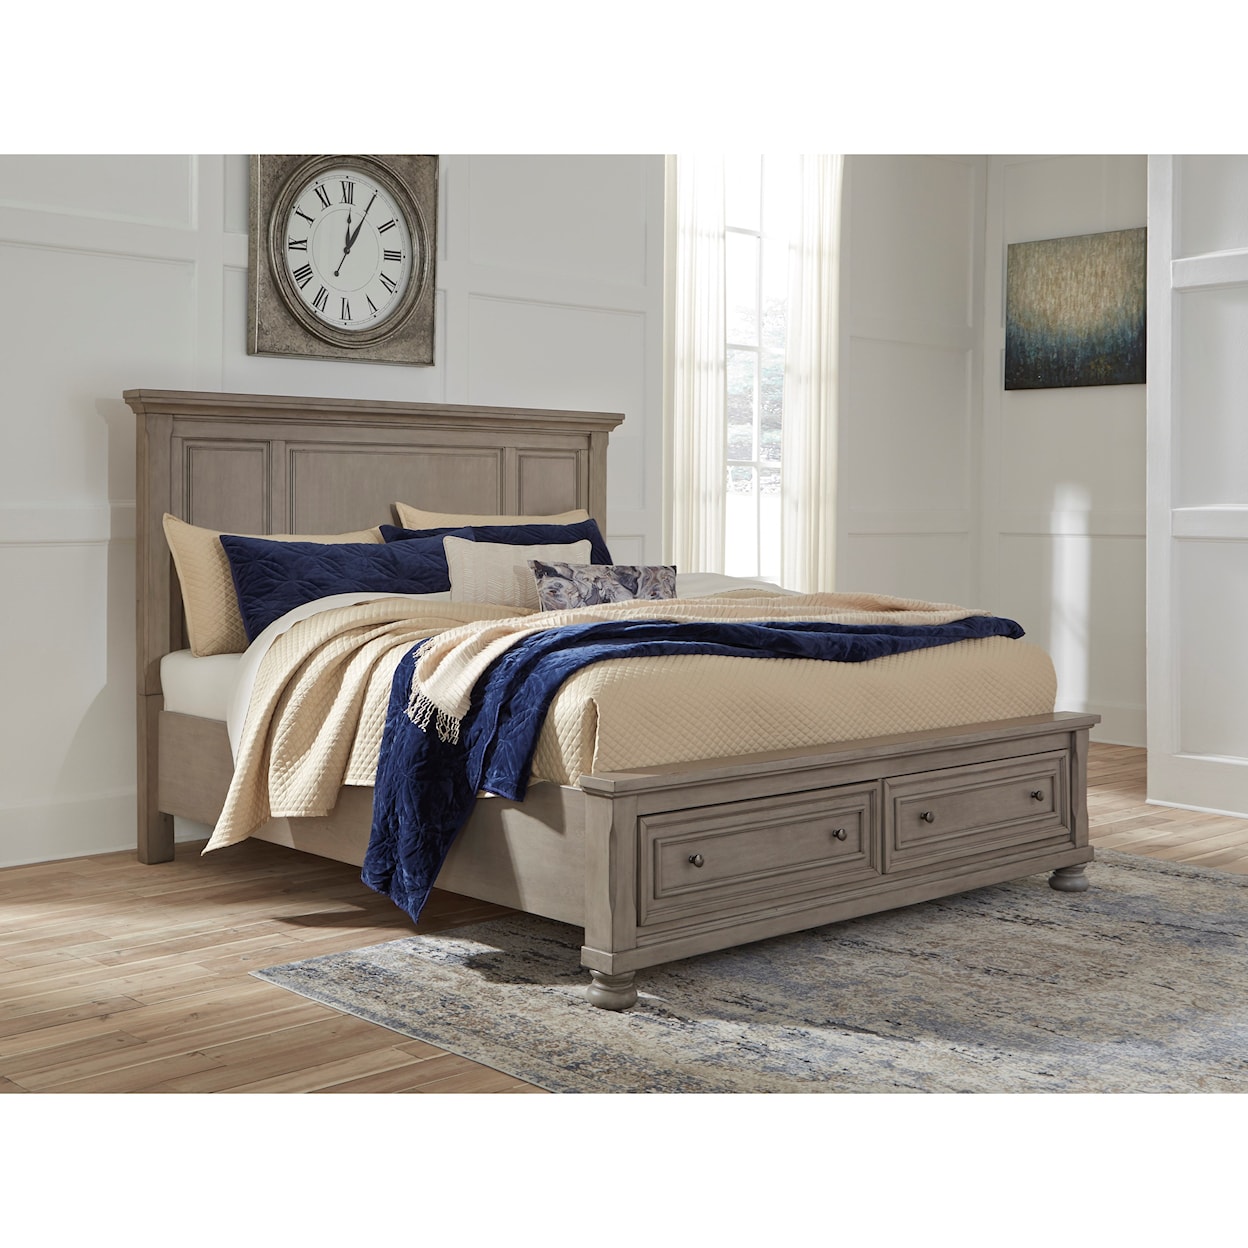 Benchcraft Lettner Cal King Panel Bed with Storage Footboard